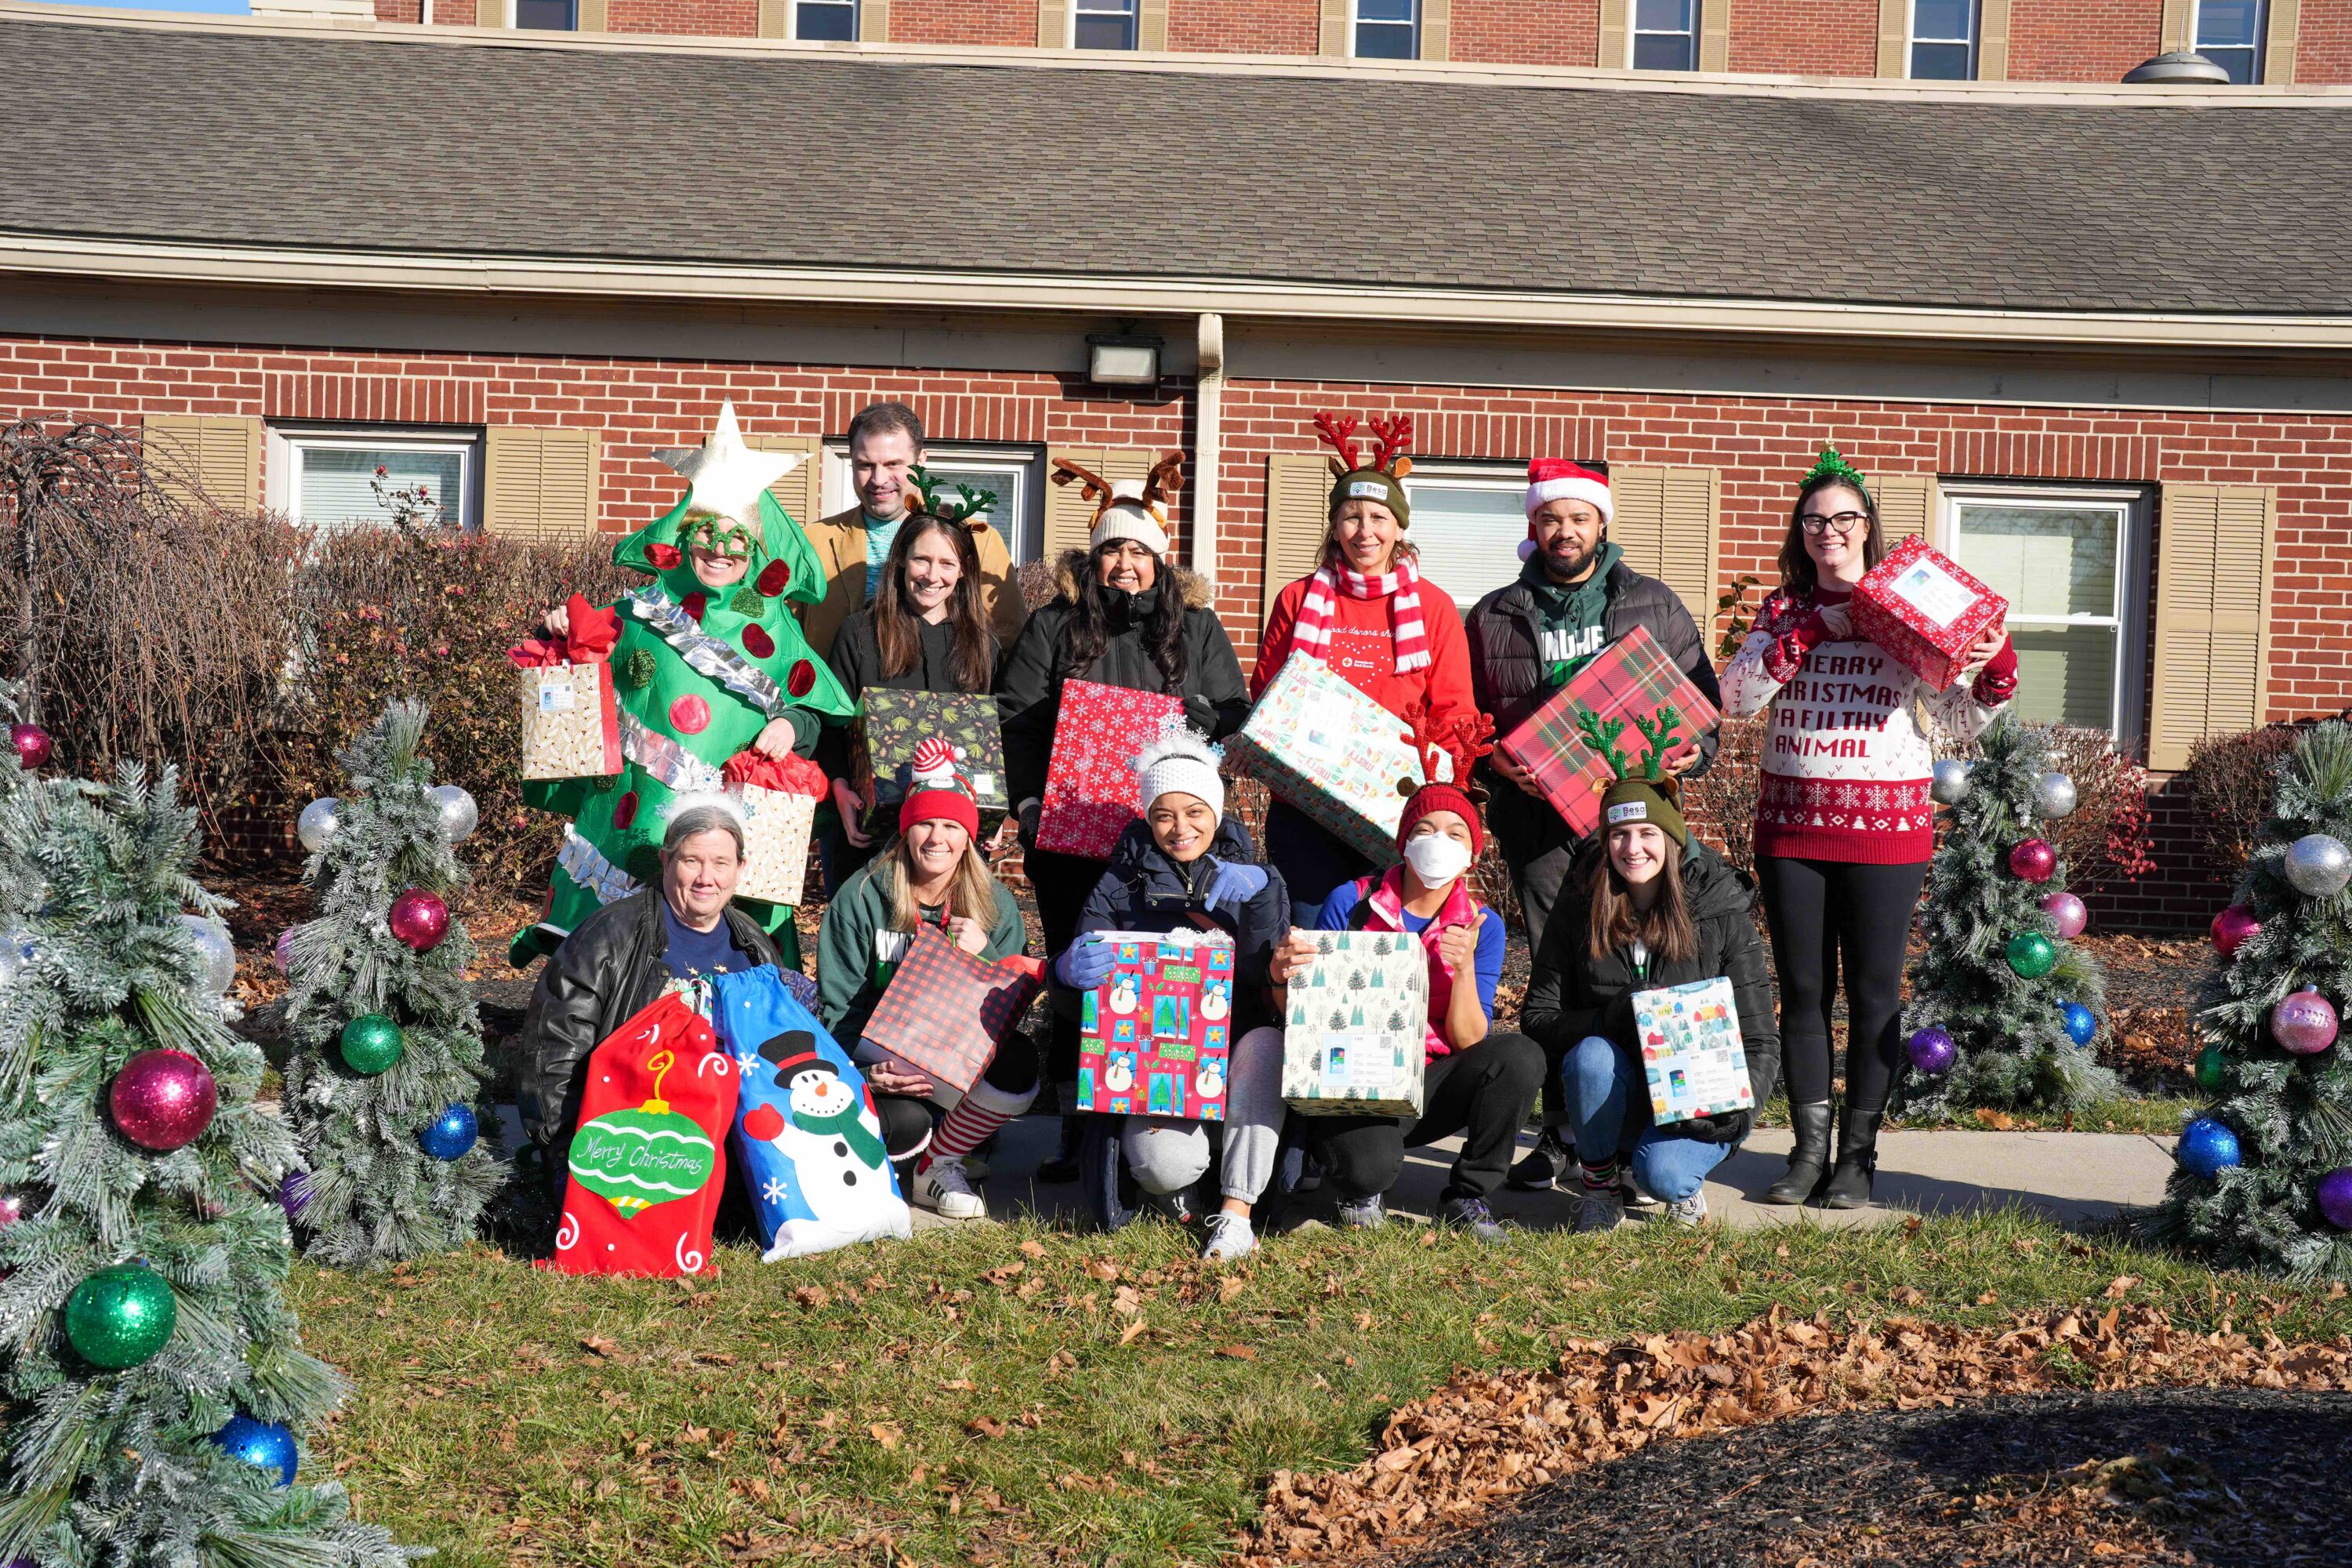 2,000 Christmas gifts donated and wrapped for senior citizens